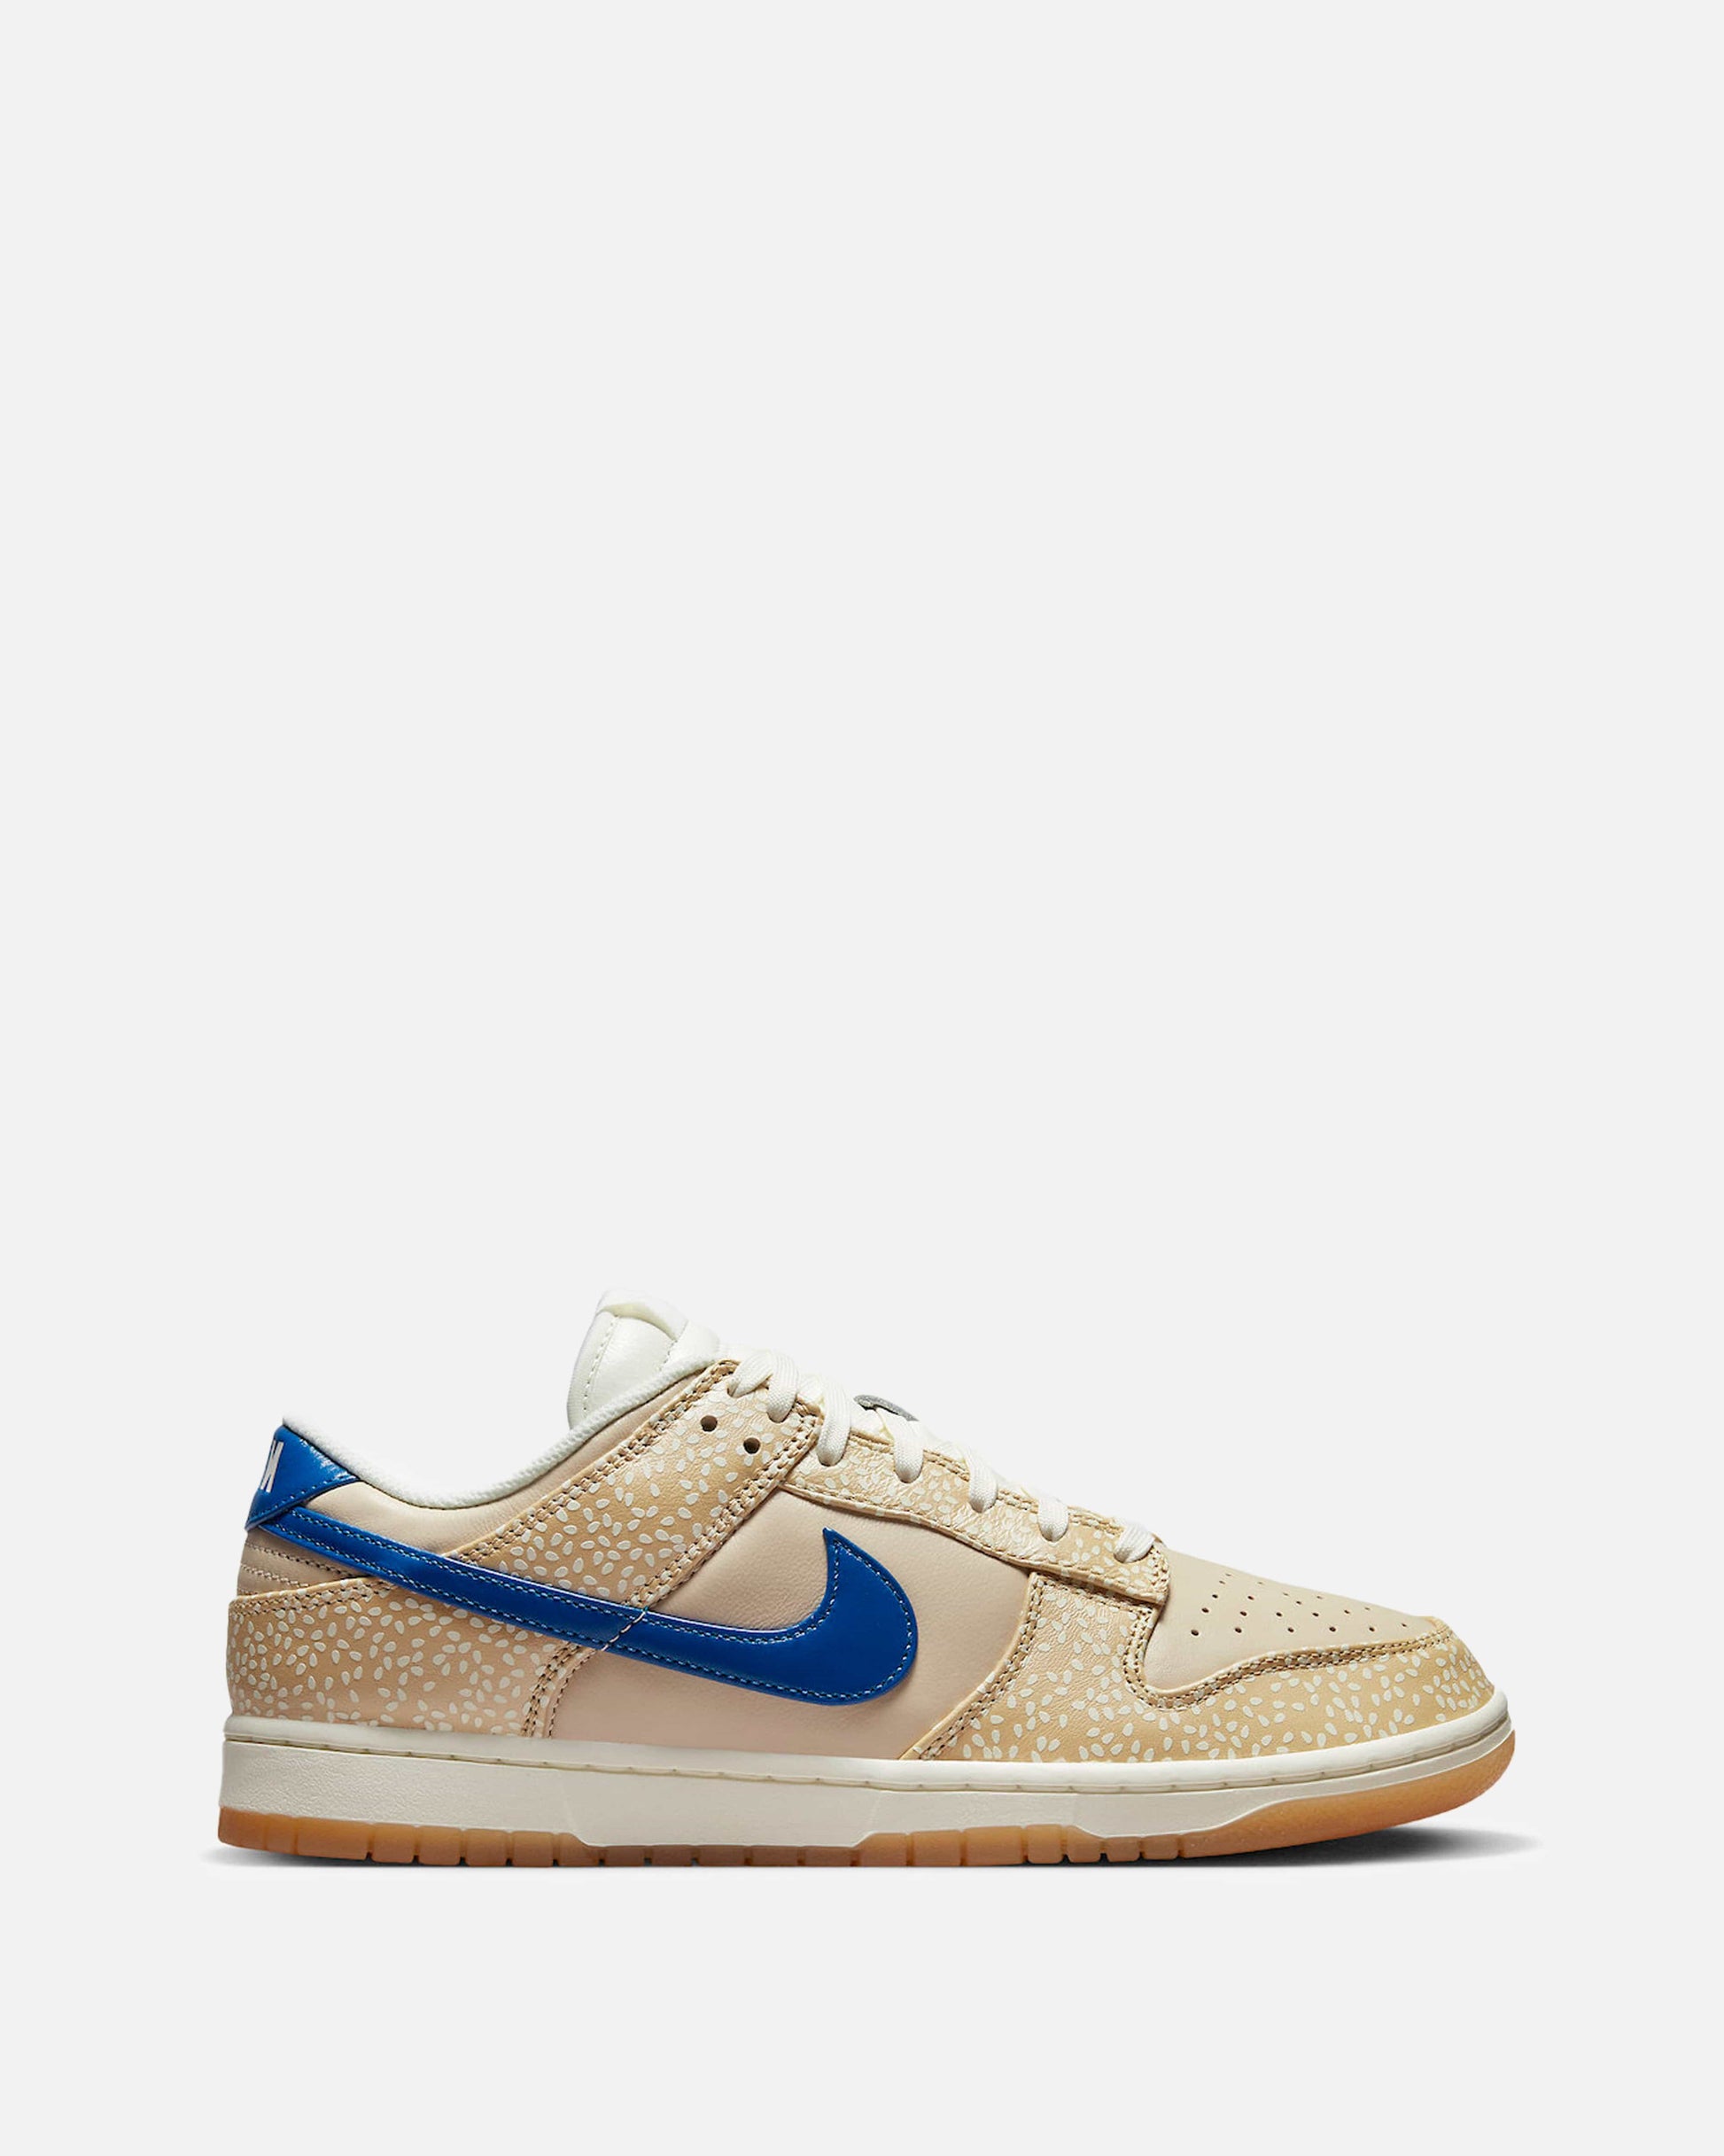 Nike Releases Nike Dunk Low 'Montreal Bagel'